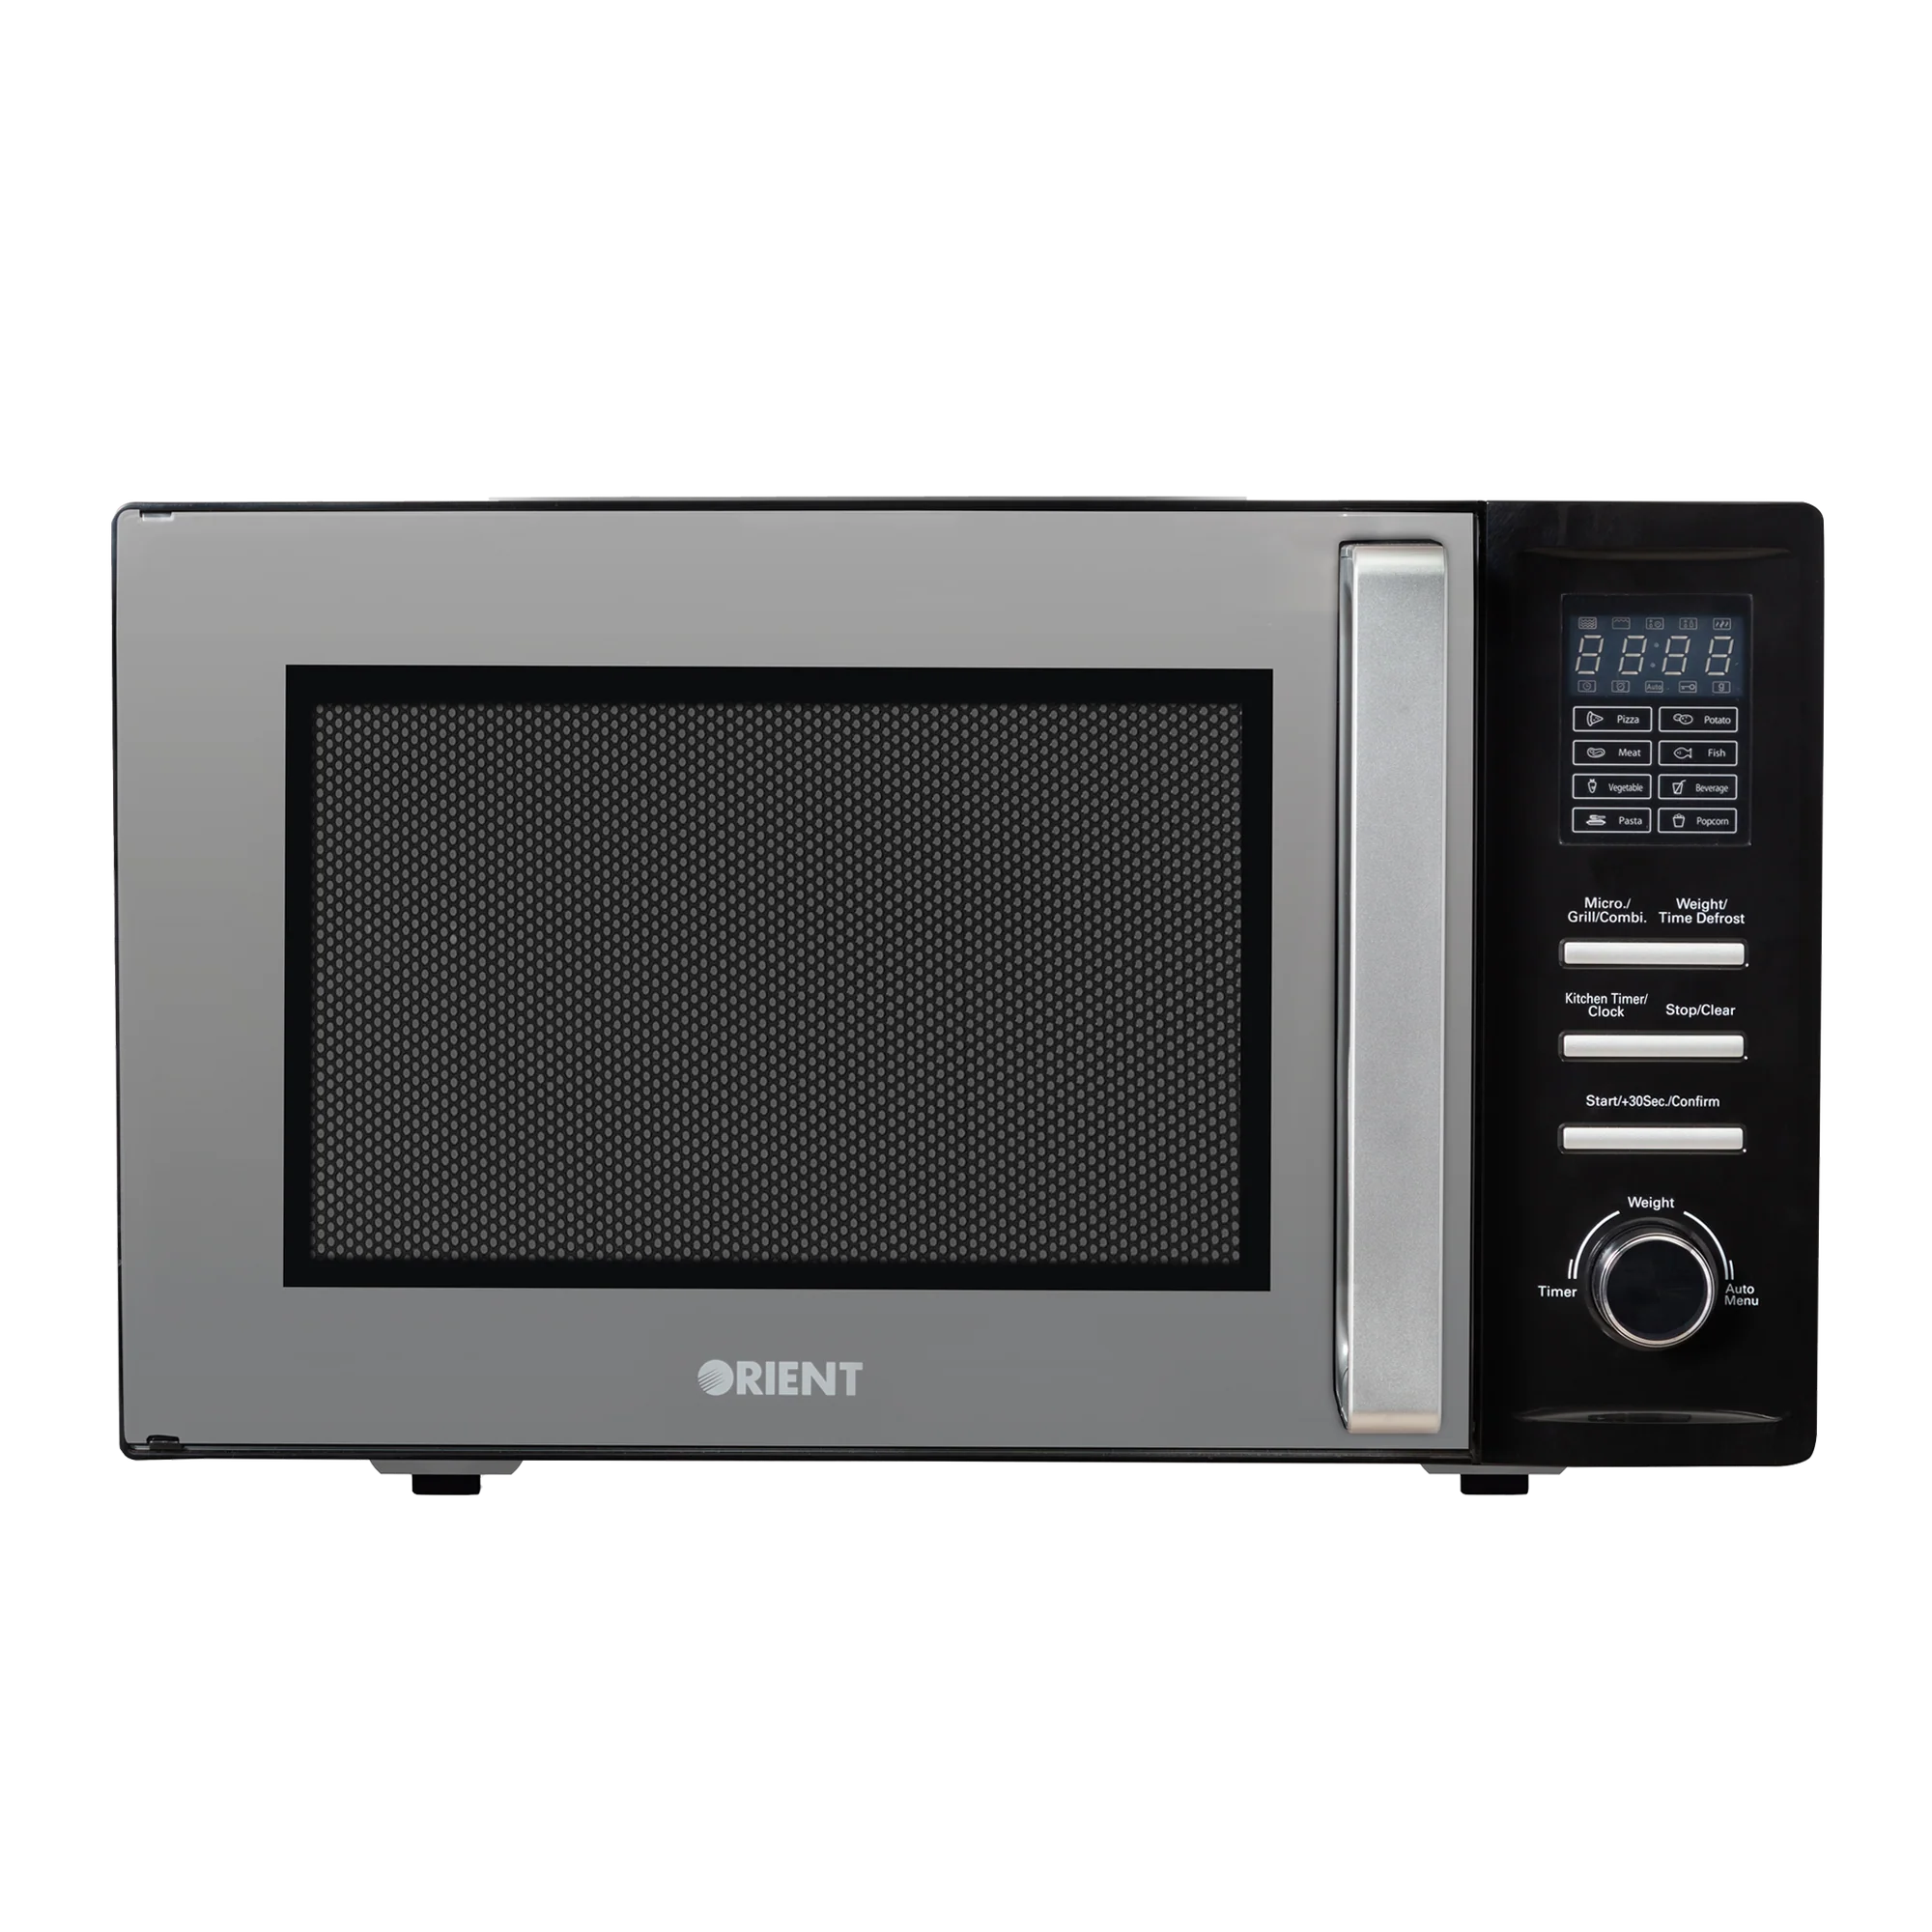 ORIENT PIZZA 34D GRILL MICROWAVE OVEN